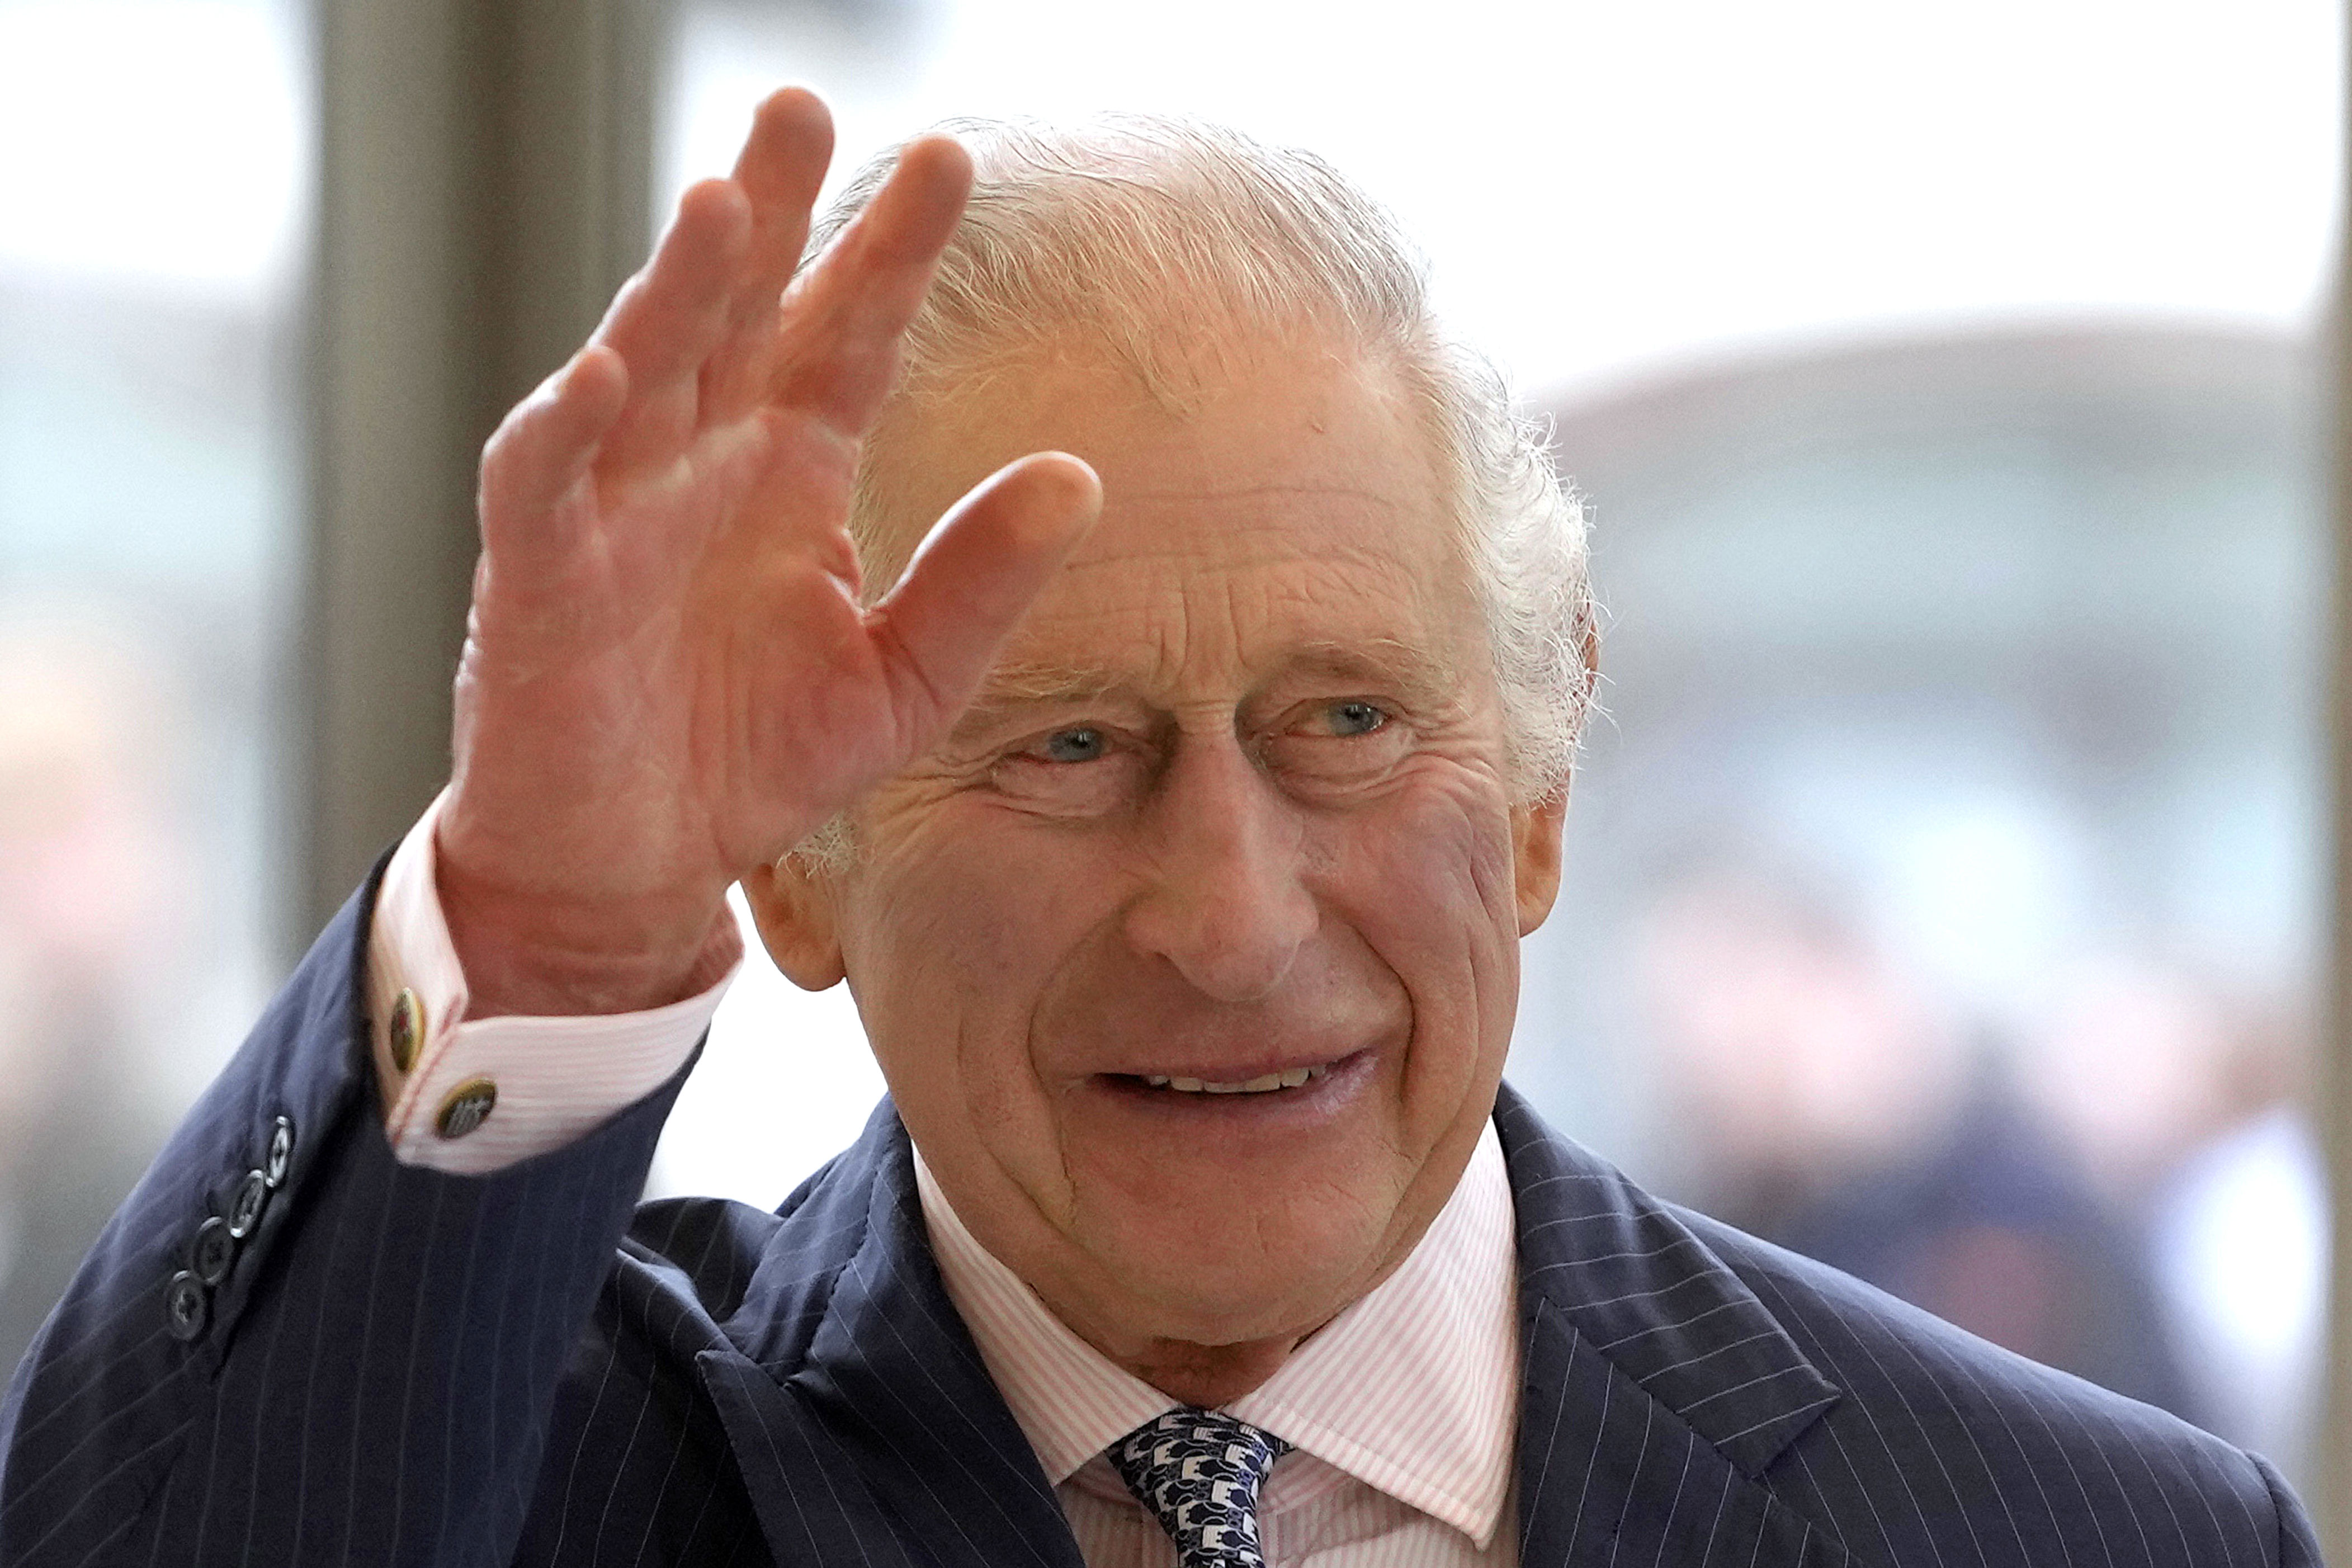 <p>King Charles III greeted wellwishers during a visit to London's European Bank for Reconstruction and Development on March 23, 2023. Hours later, the monarch's trip to France -- which was set to begin on March 25 and marked his and Queen Consort Camilla's first international tour of their reign -- was postponed as protests continued to rock the country, with France's Elysée Palace saying in a statement, "The decision was taken by the French and British governments, following a phone call between the president of the Republic and the king this morning."</p>